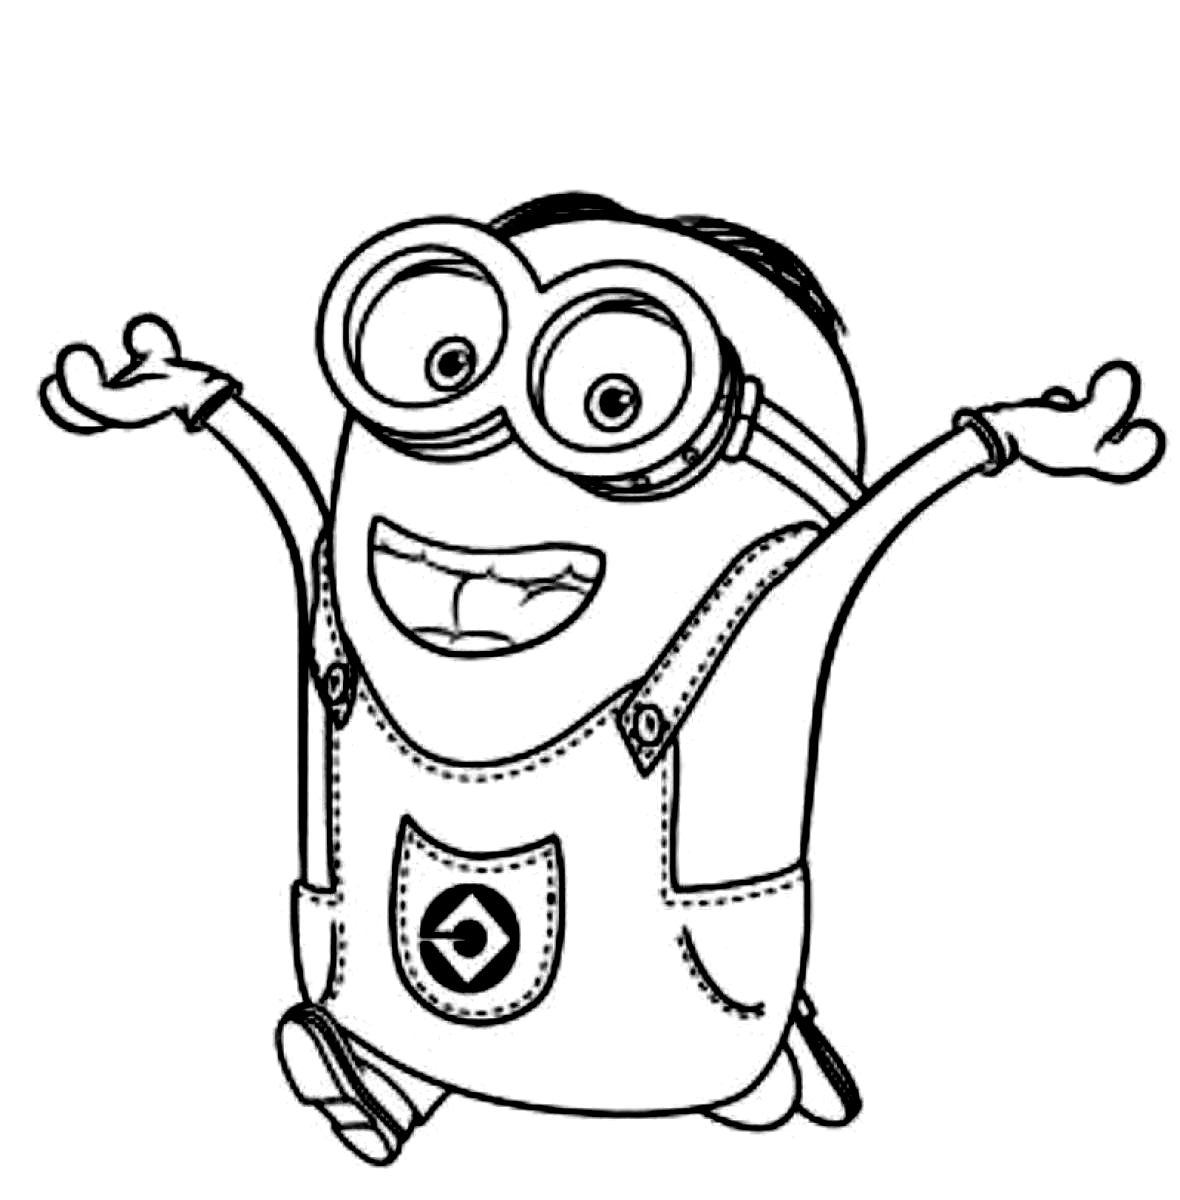 despicable me pictures to print free printable despicable me coloring pages for kids to despicable me pictures print 